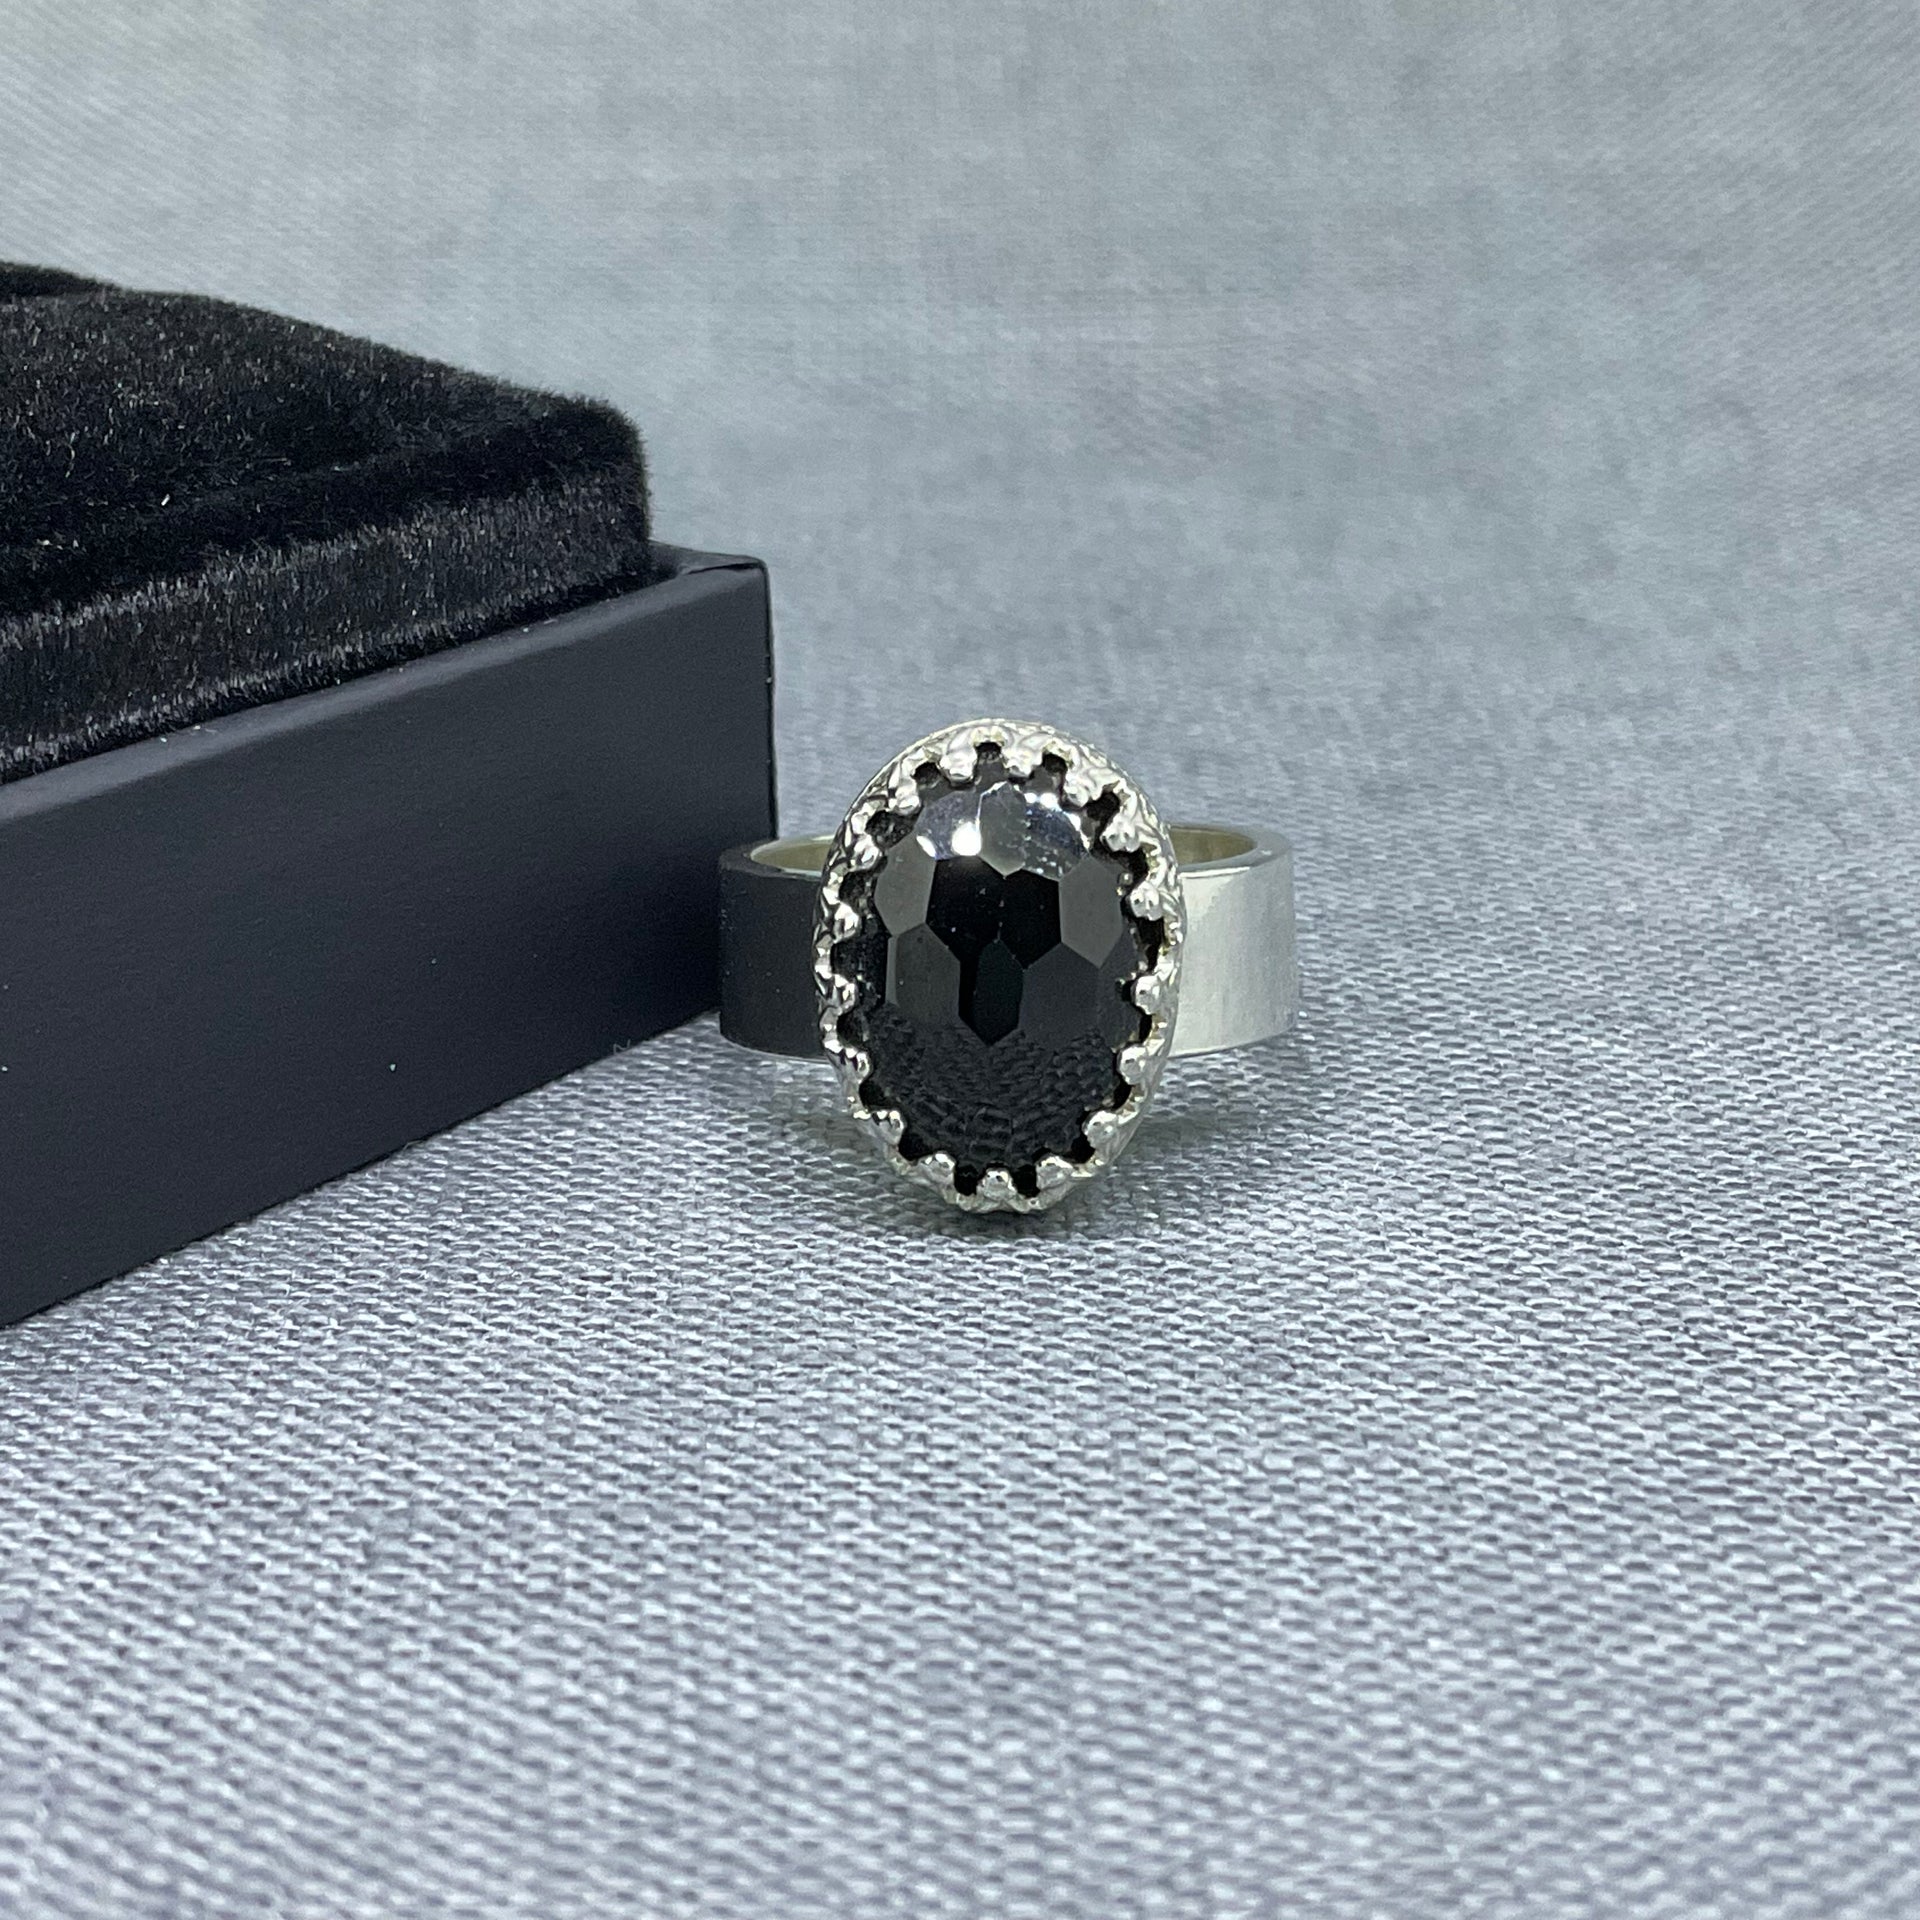 Faceted Black Spinel Sterling Silver Ring, Size M / US 6 1/4